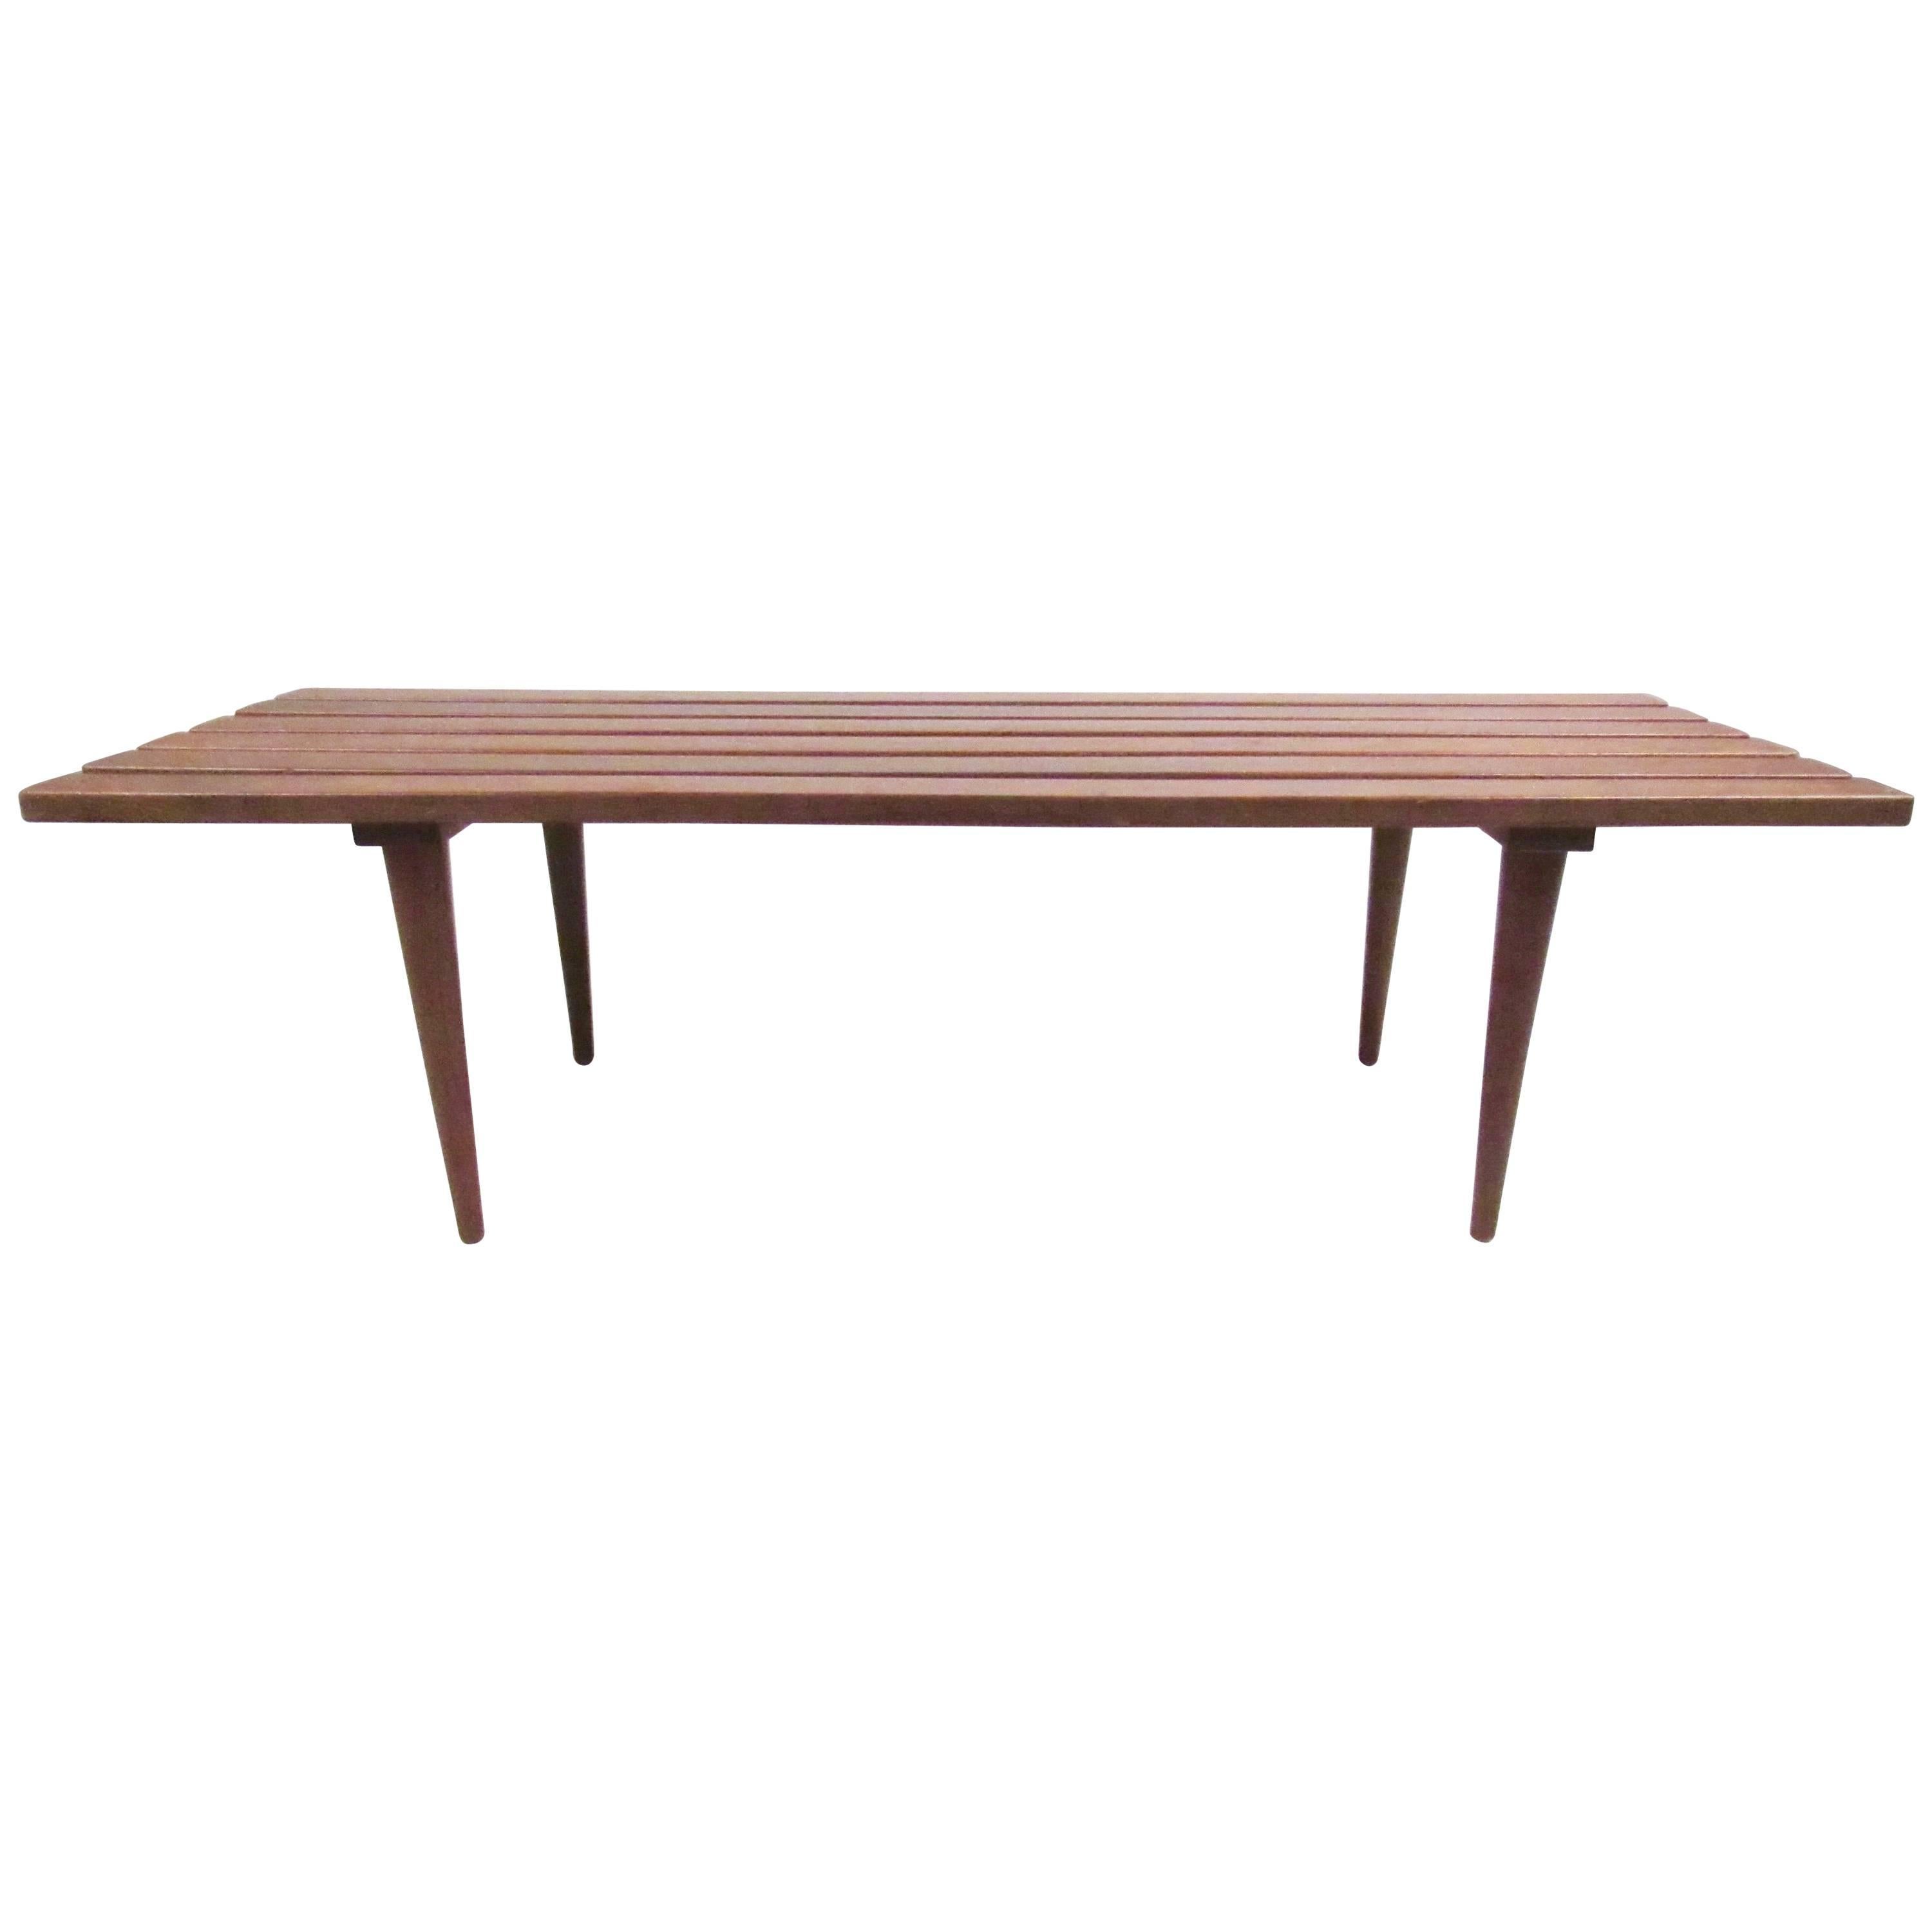 This vintage slat coffee table features Mid-Century construction with tapered legs, walnut finish, and sturdy construction. Perfect piece for use as a coffee table or as a bench. Please confirm item location (NY or NJ).